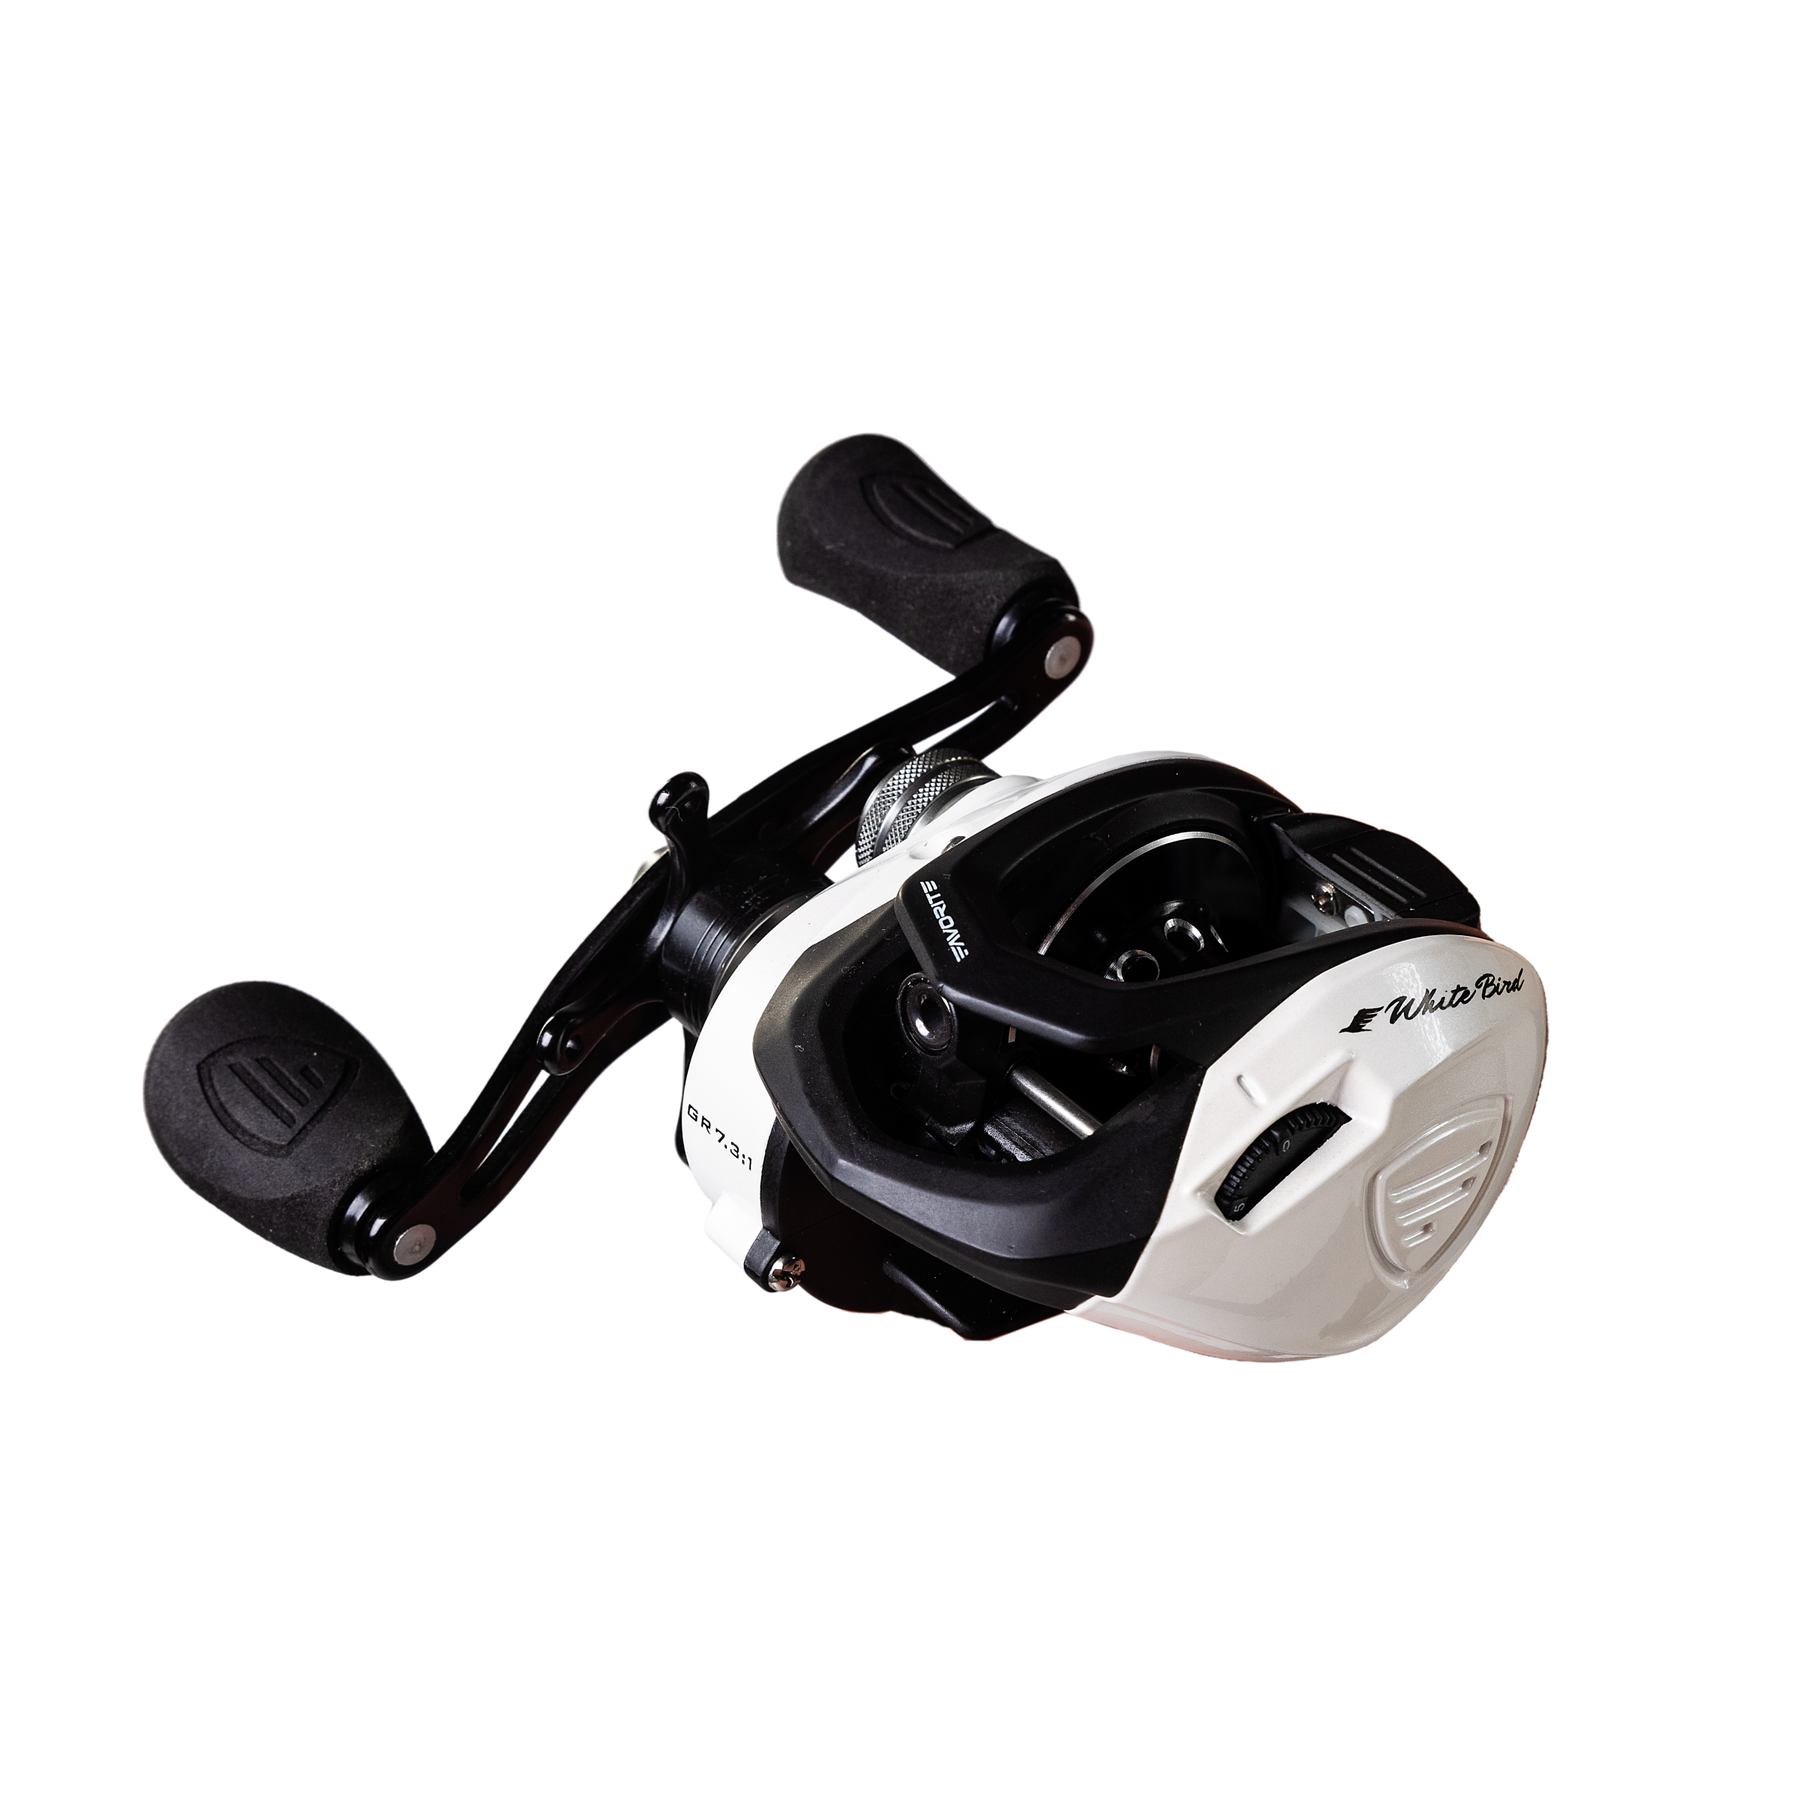 Favorite Fishing White Bird Casting Reel with Free S&H — CampSaver